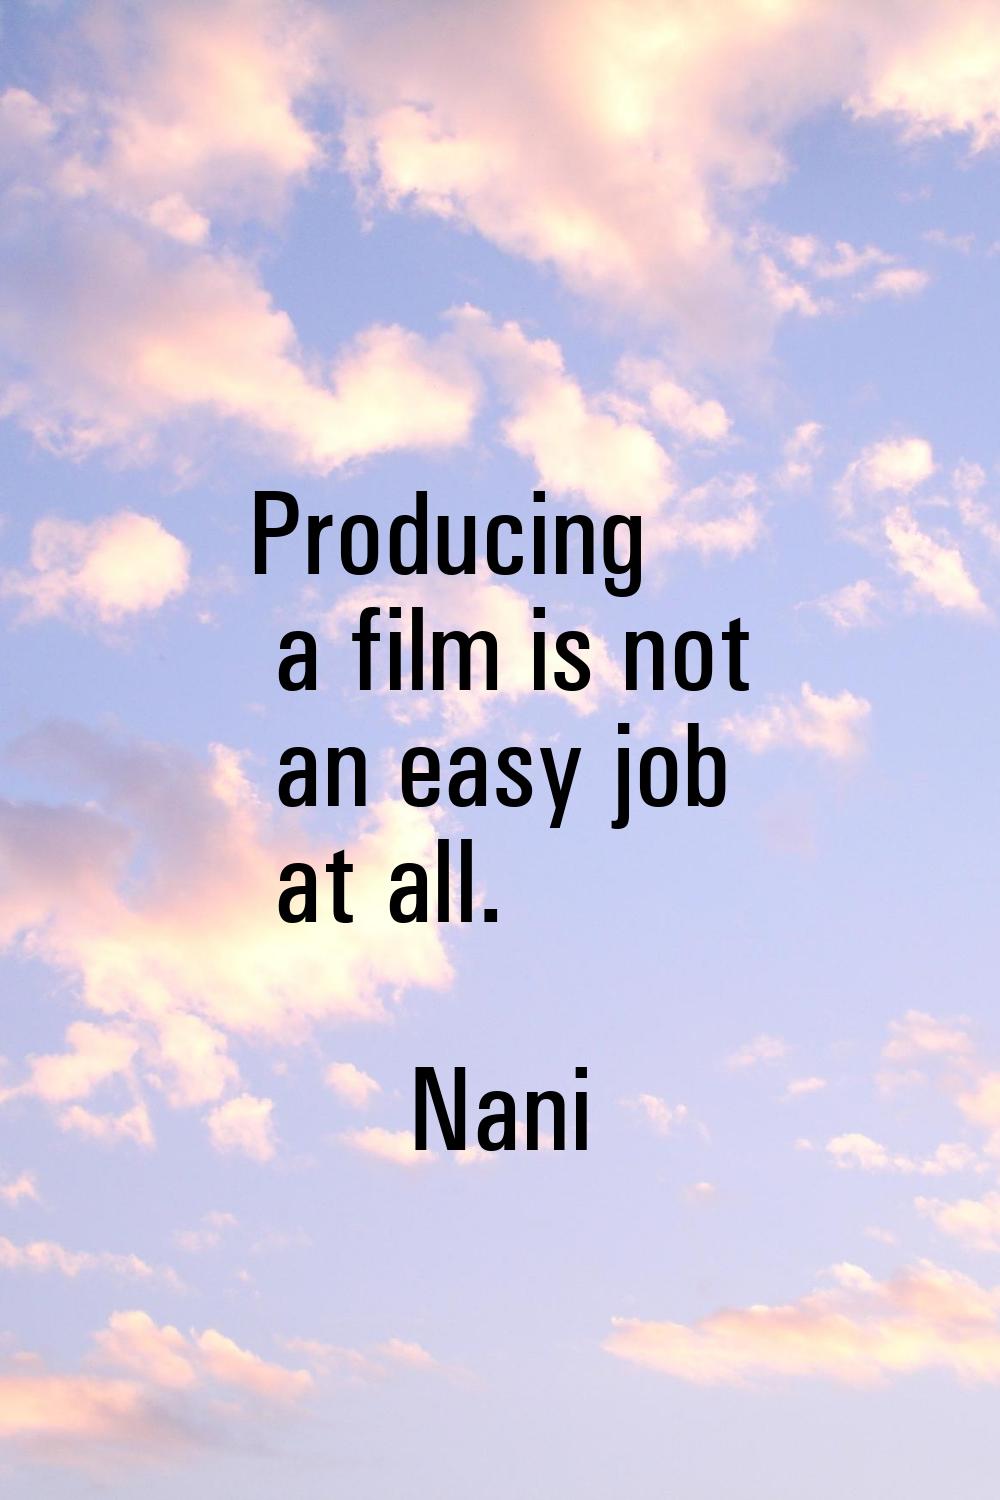 Producing a film is not an easy job at all.